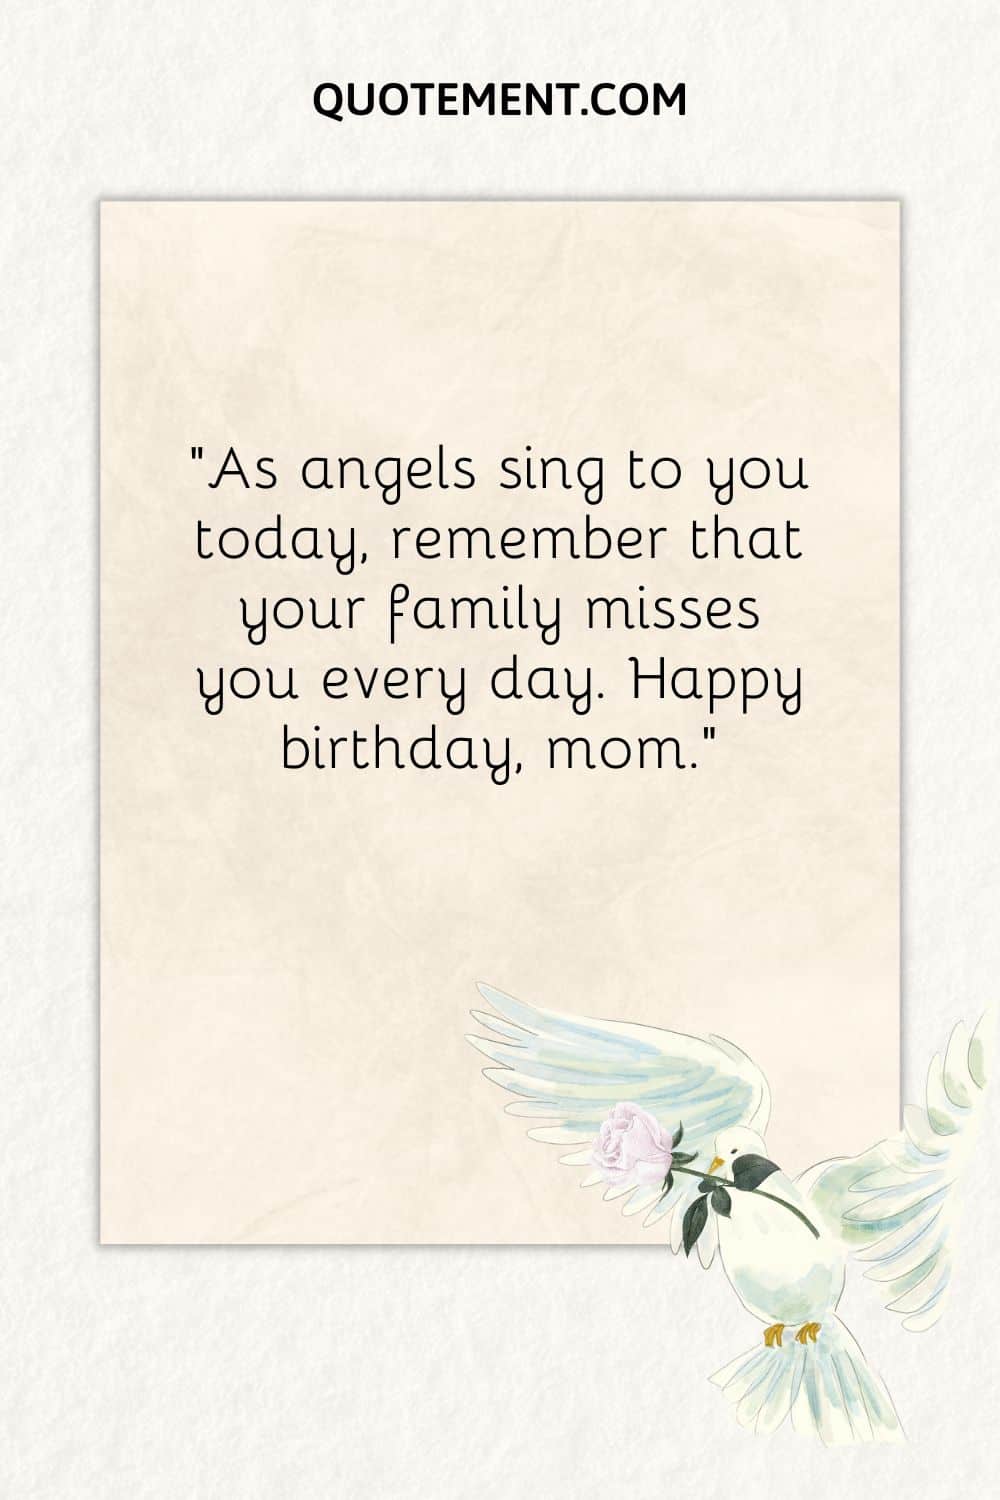 As angels sing to you today, remember that your family misses you every day